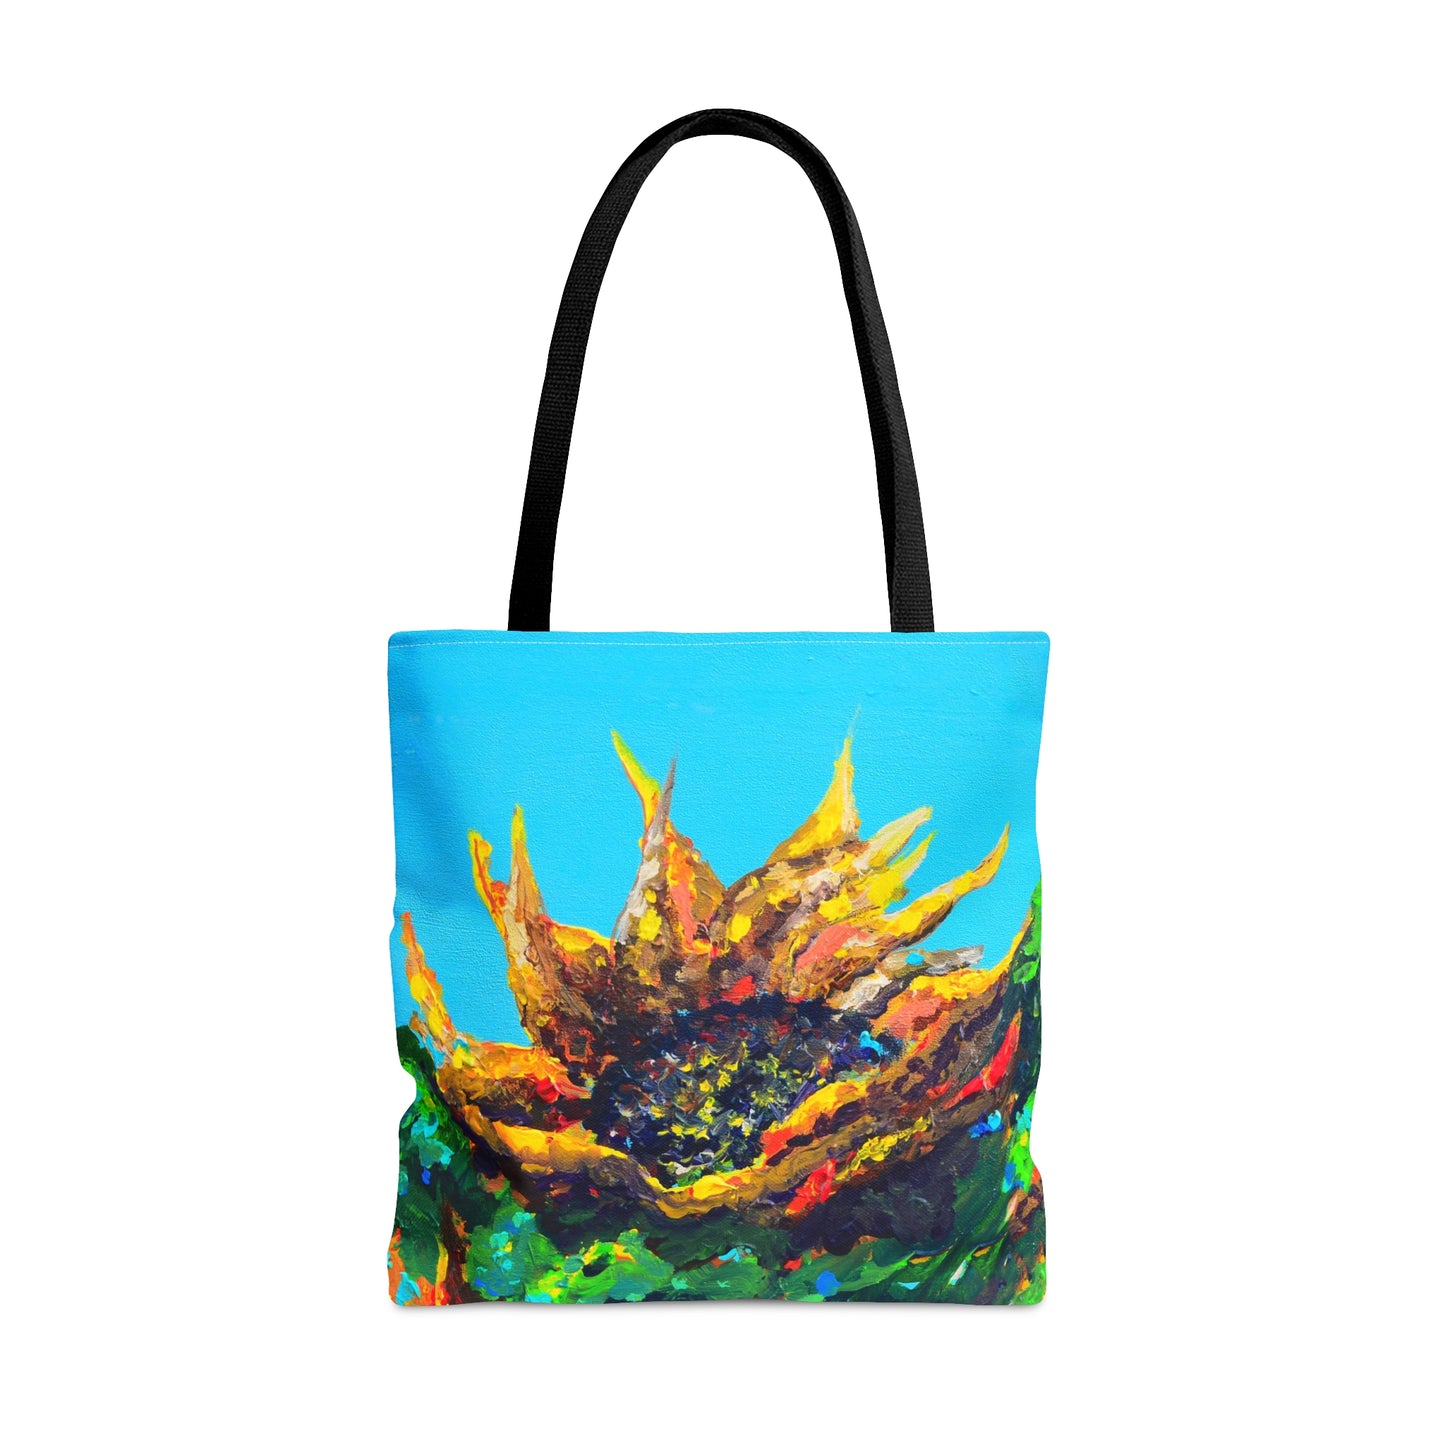 Sunflower Tote Bag, 18 x 17 in